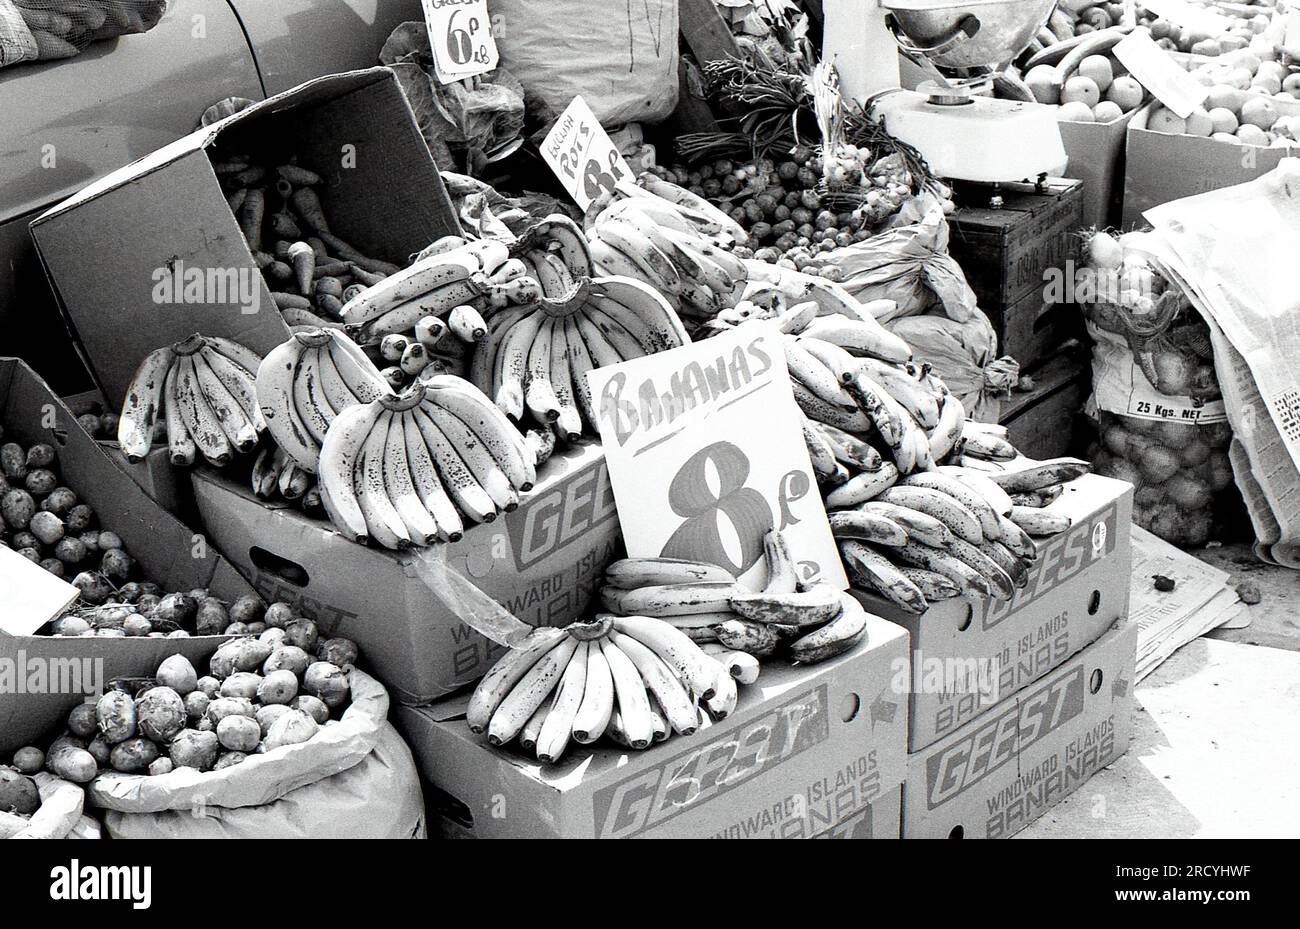 Hands of Geest bananas for sale on a fruit and vegetable stall at Bolney market in West Sussex, England on June 27, 1976. The Geest company sold their banana business in 1995. Stock Photo